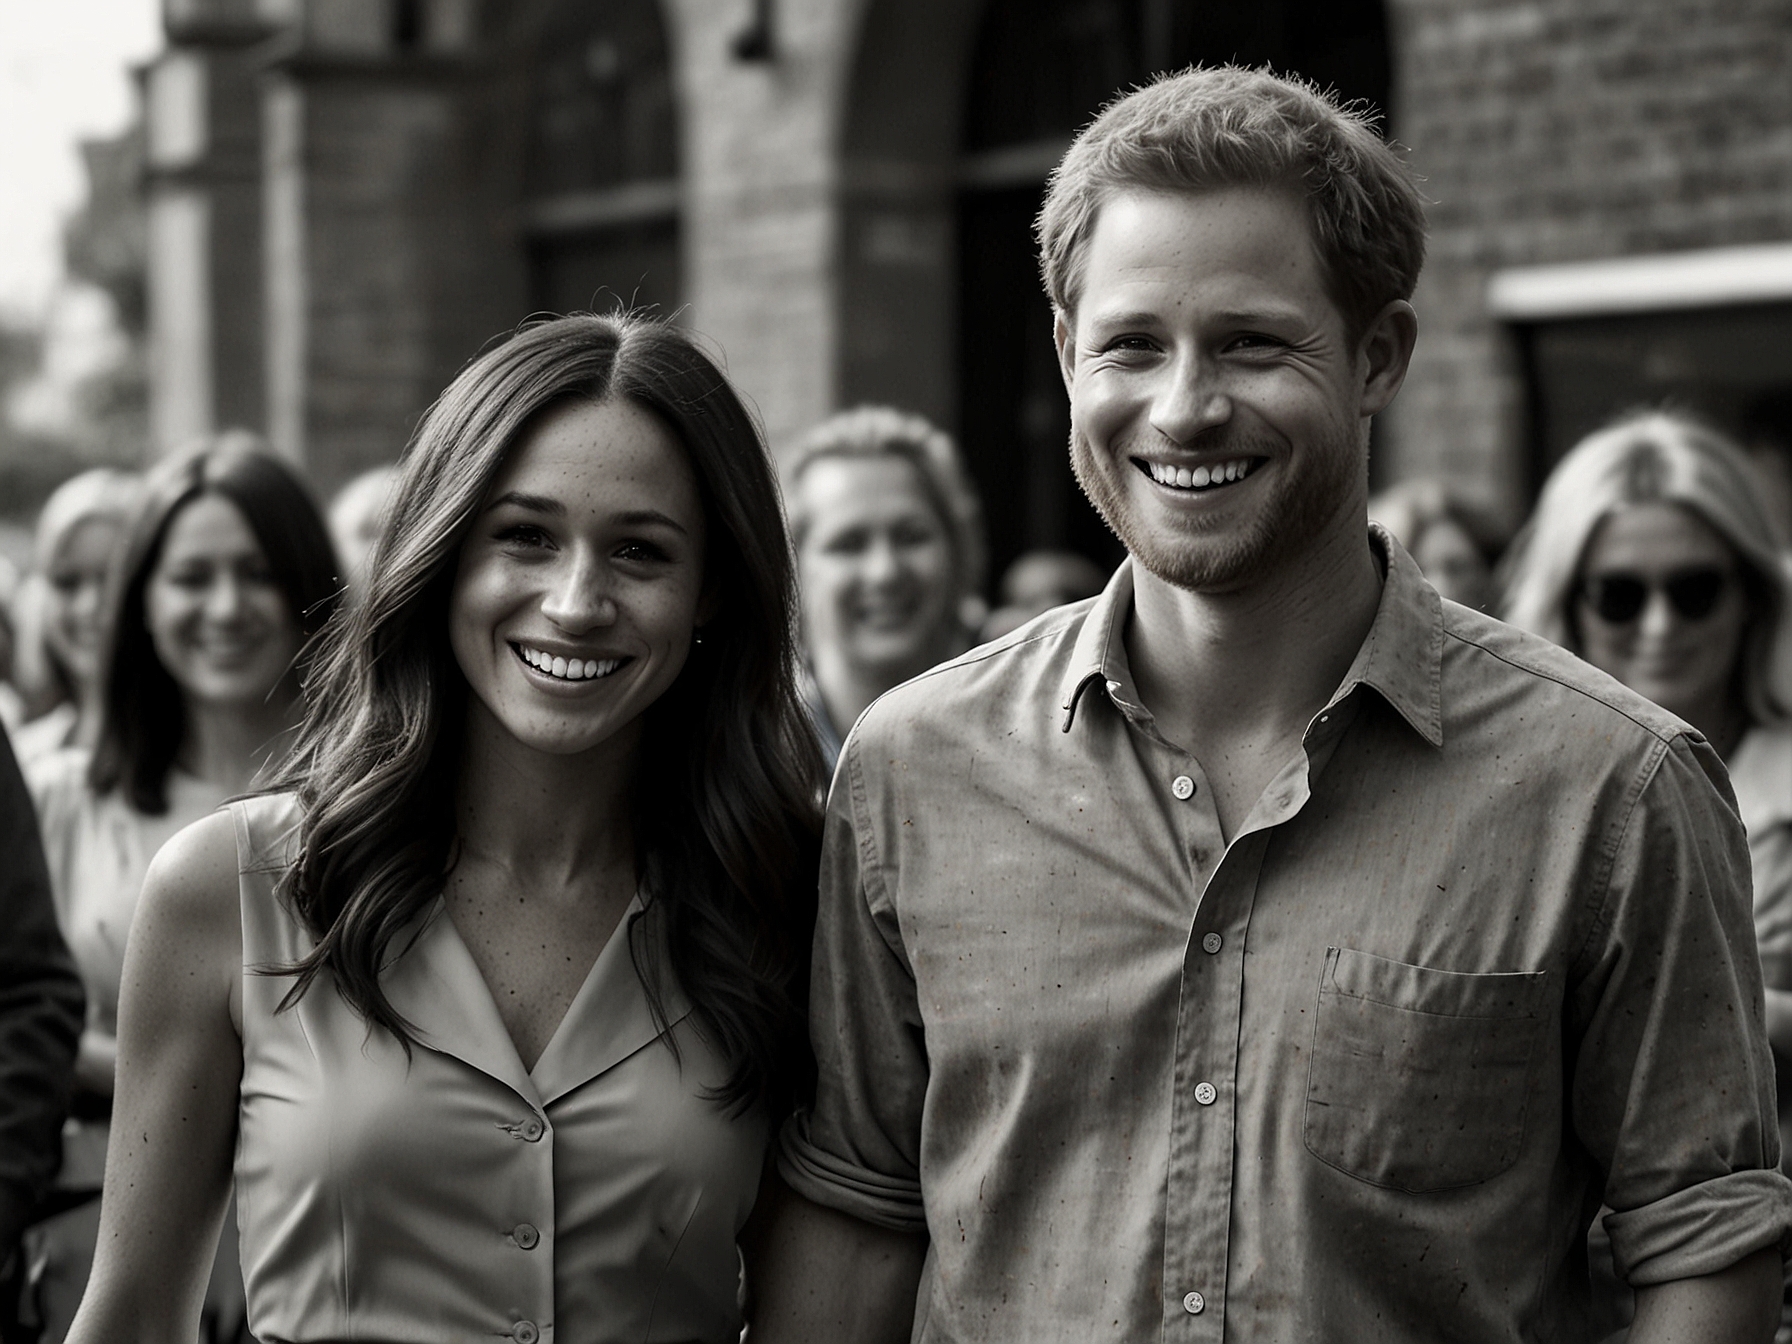 Meghan Markle and Prince Harry attending a public event, highlighting their new life in the US away from royal duties, while they smile and interact with attendees.